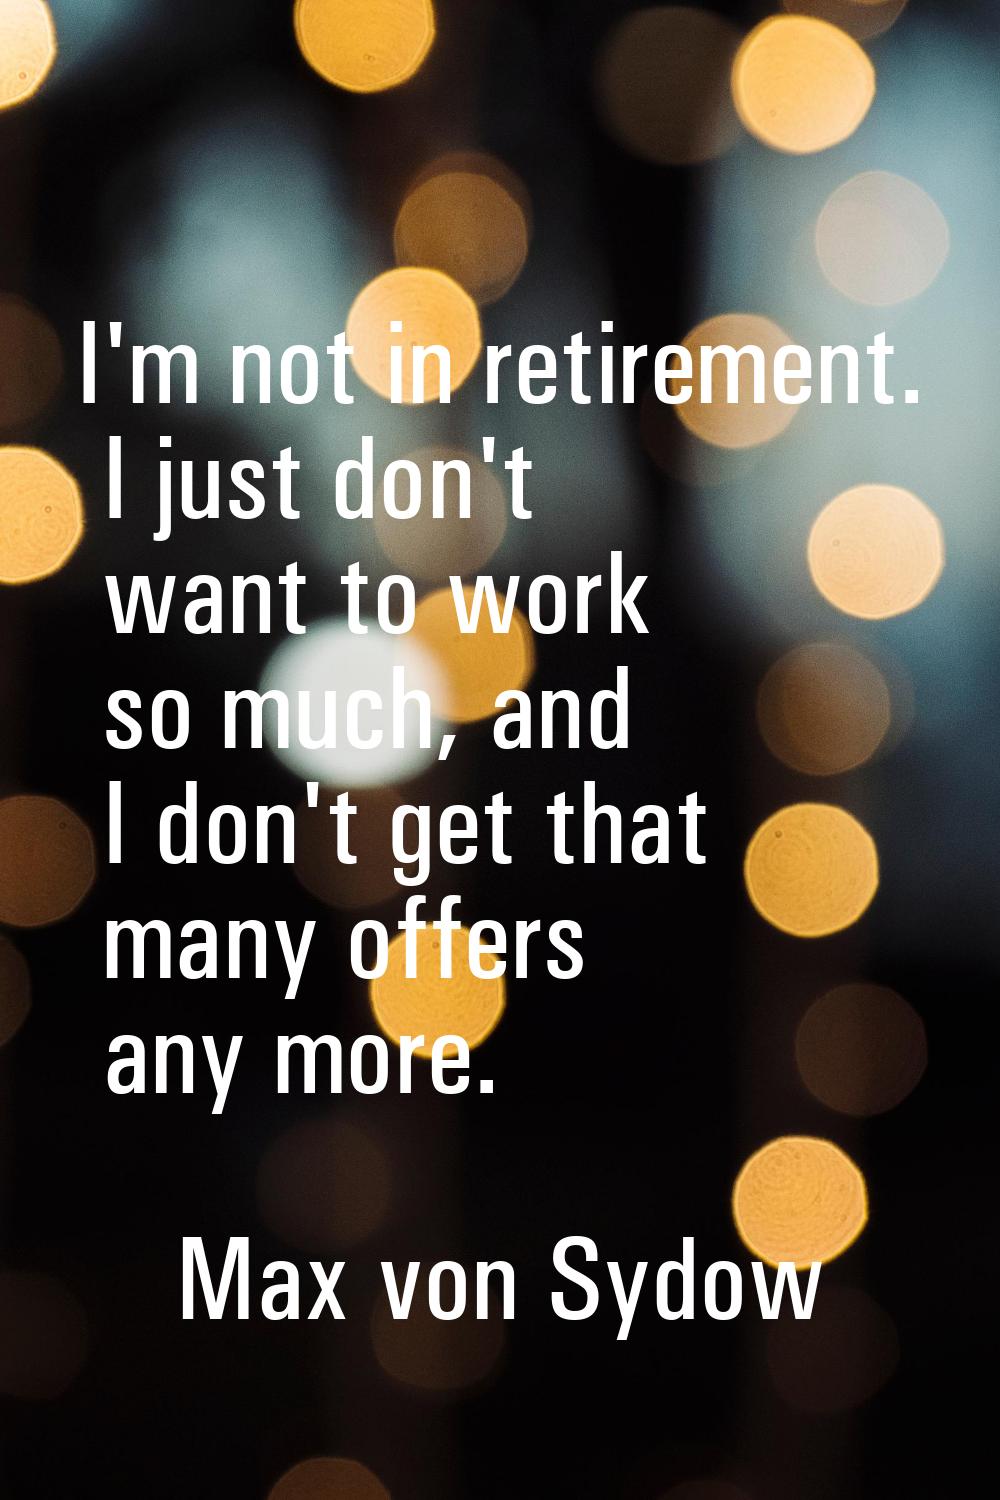 I'm not in retirement. I just don't want to work so much, and I don't get that many offers any more